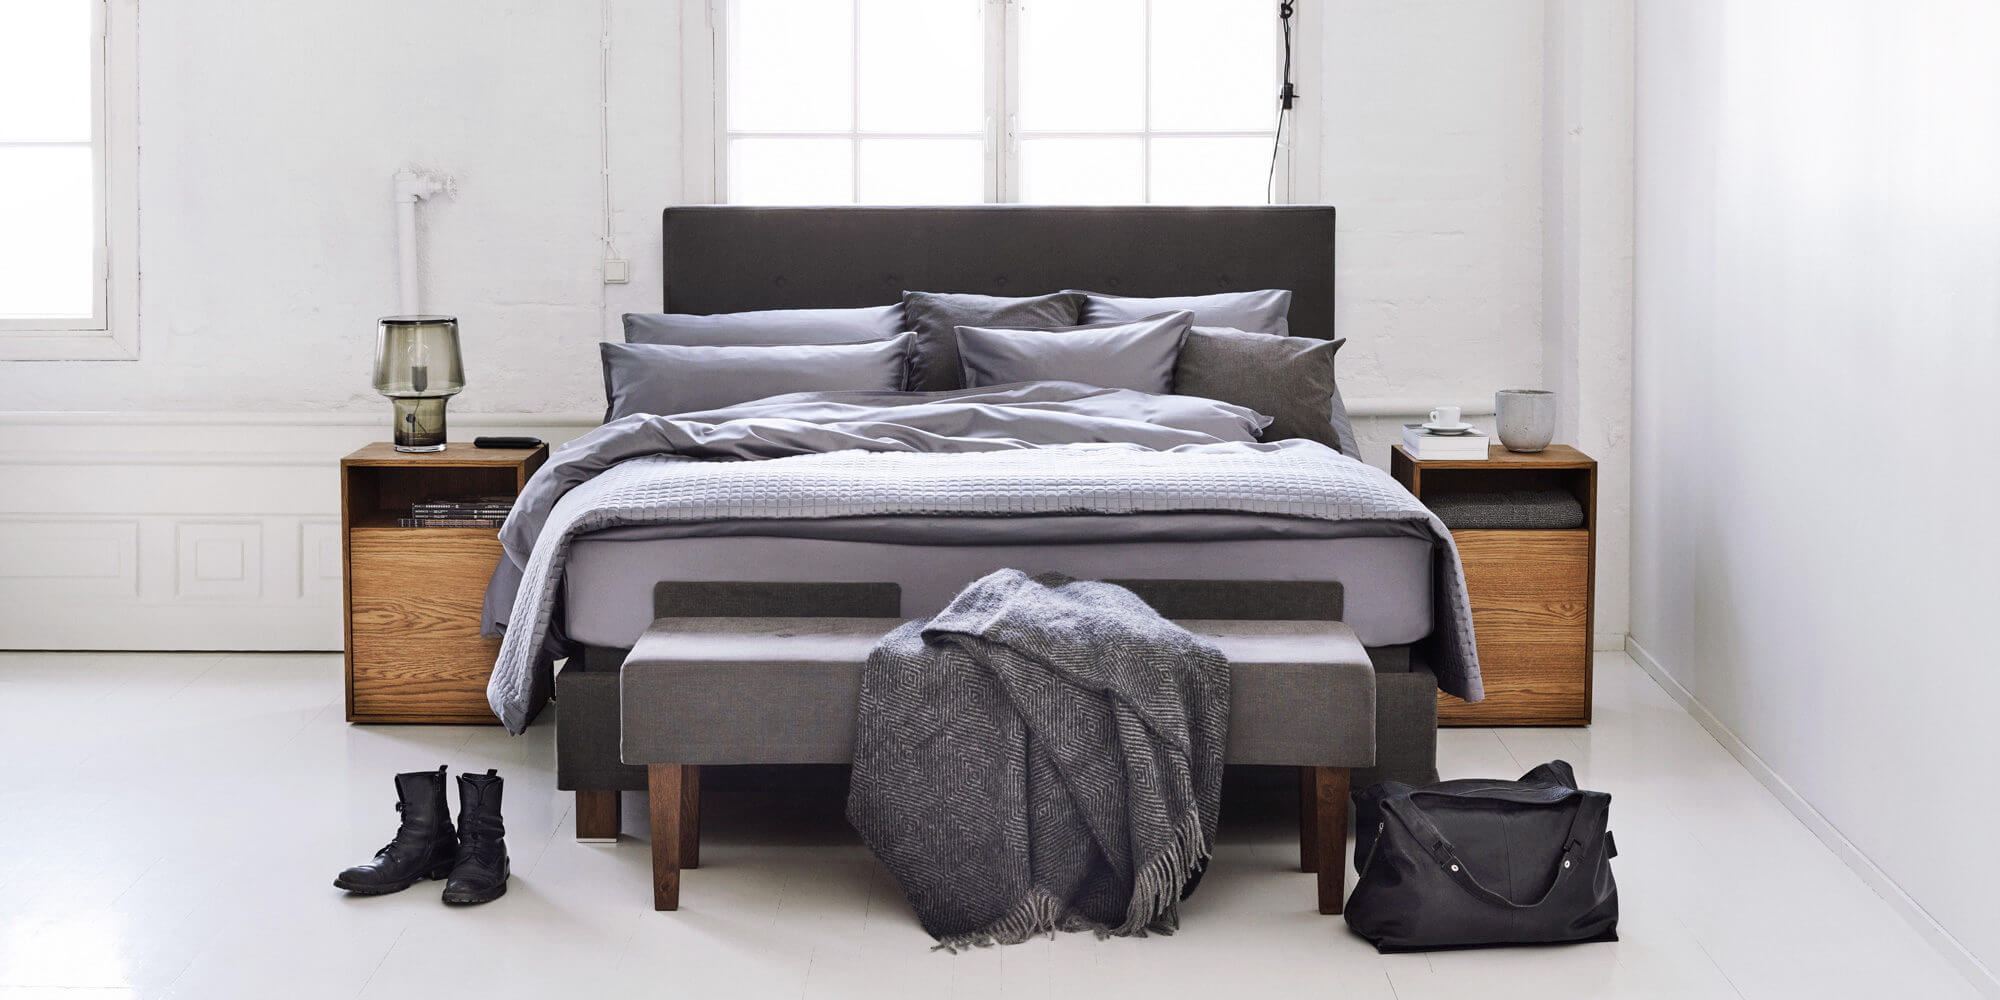 FENNOBED has the healthiest bed and optimizes it further